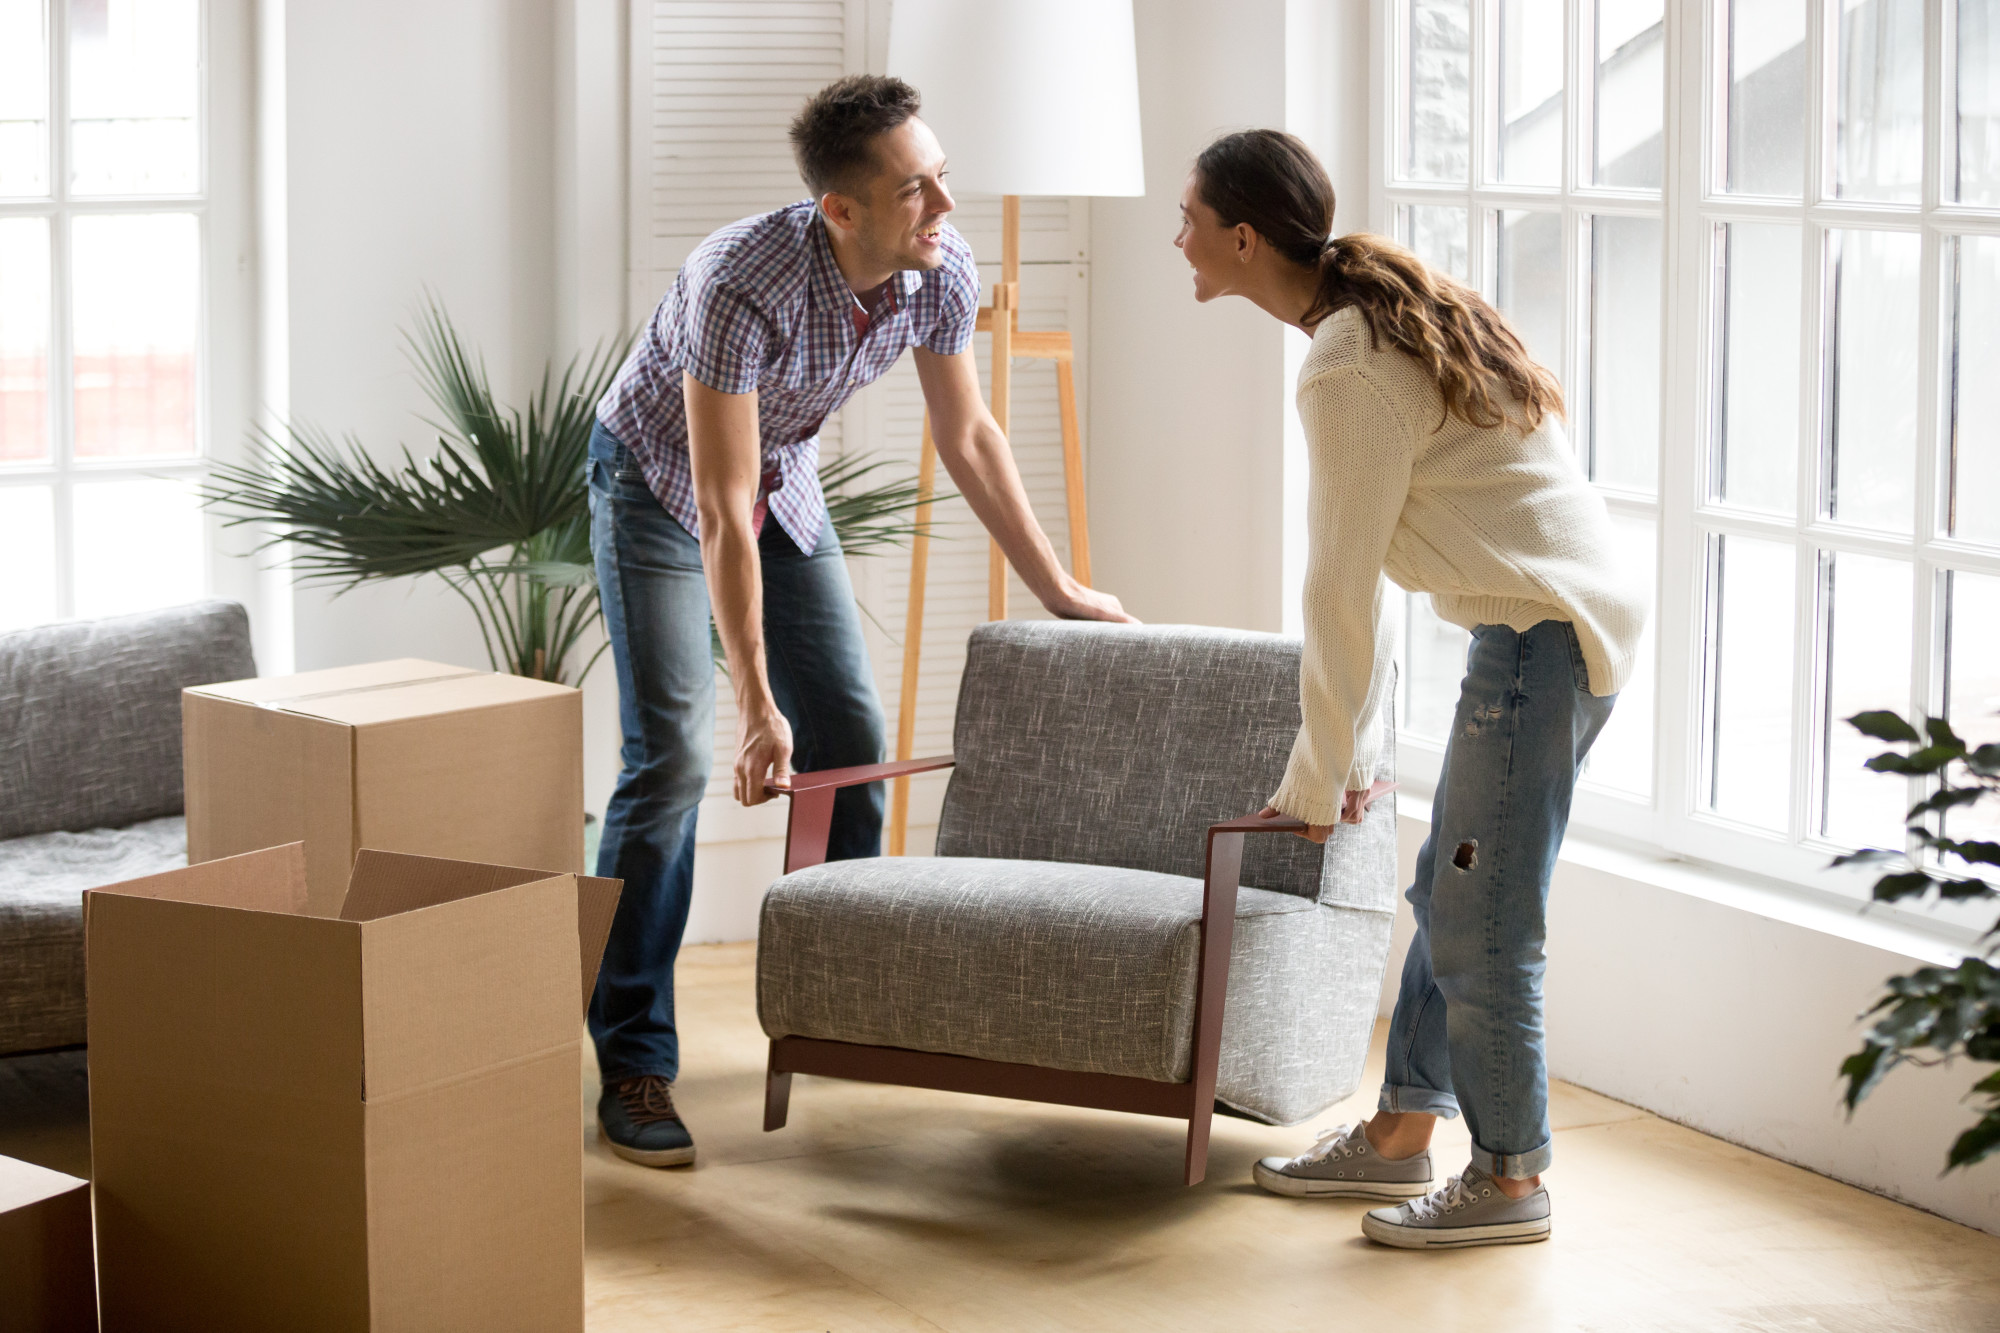 Furnishing a New Home: How to Buy Furniture When You Have No Money